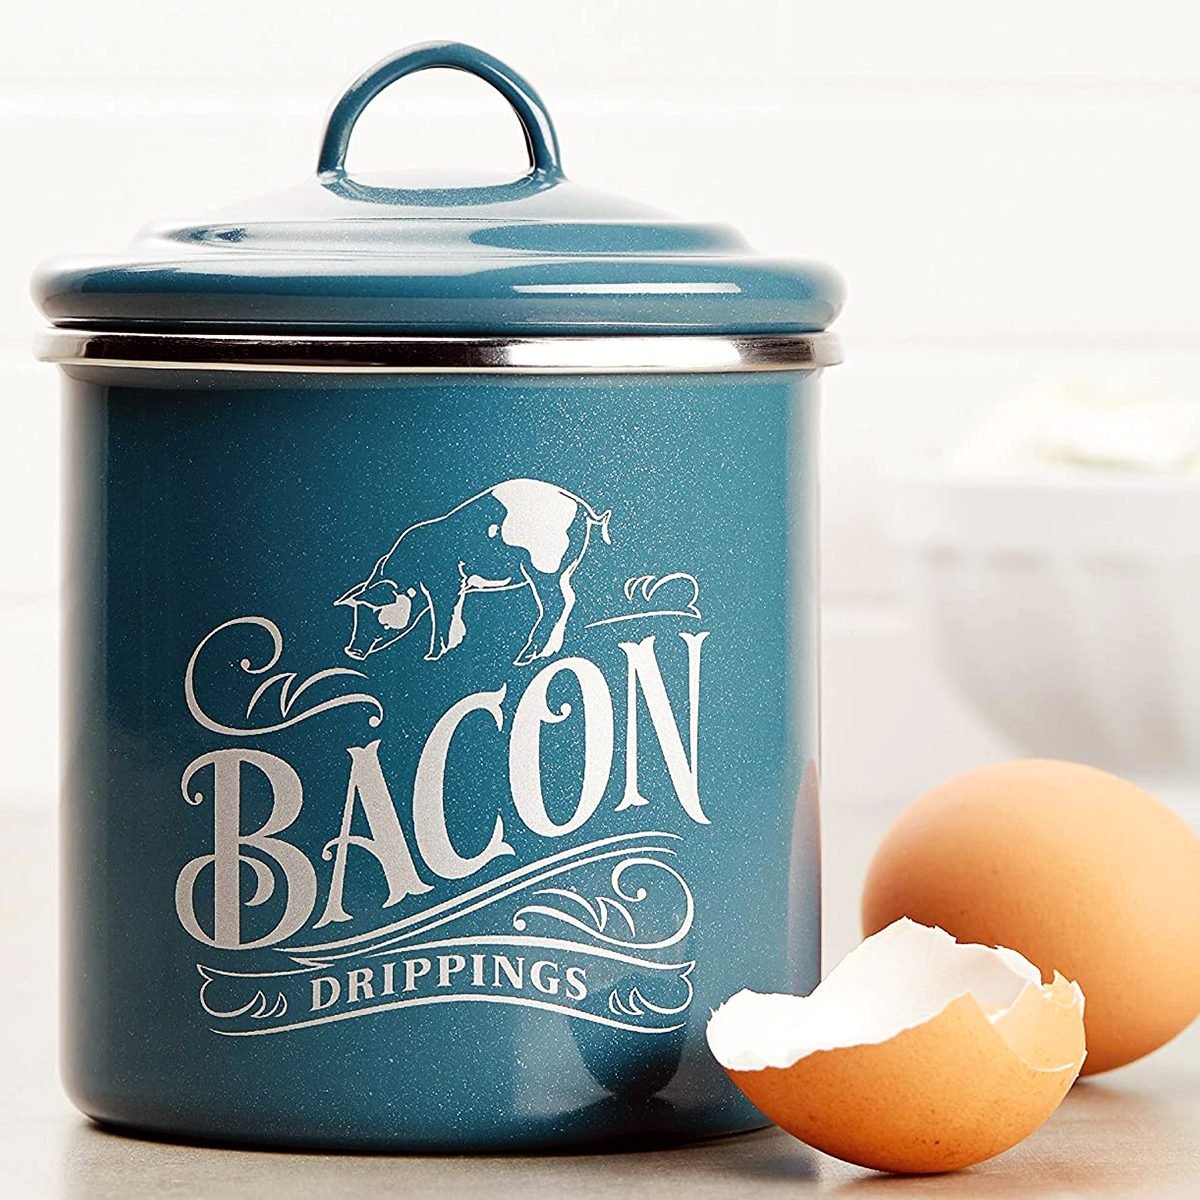 https://www.tasteofhome.com/wp-content/uploads/2021/12/Ayesha-Curry-Enamel-on-Steel-Bacon-Grease-Can-Lifestyle-FT-via-amazon.com-ecomm.jpg